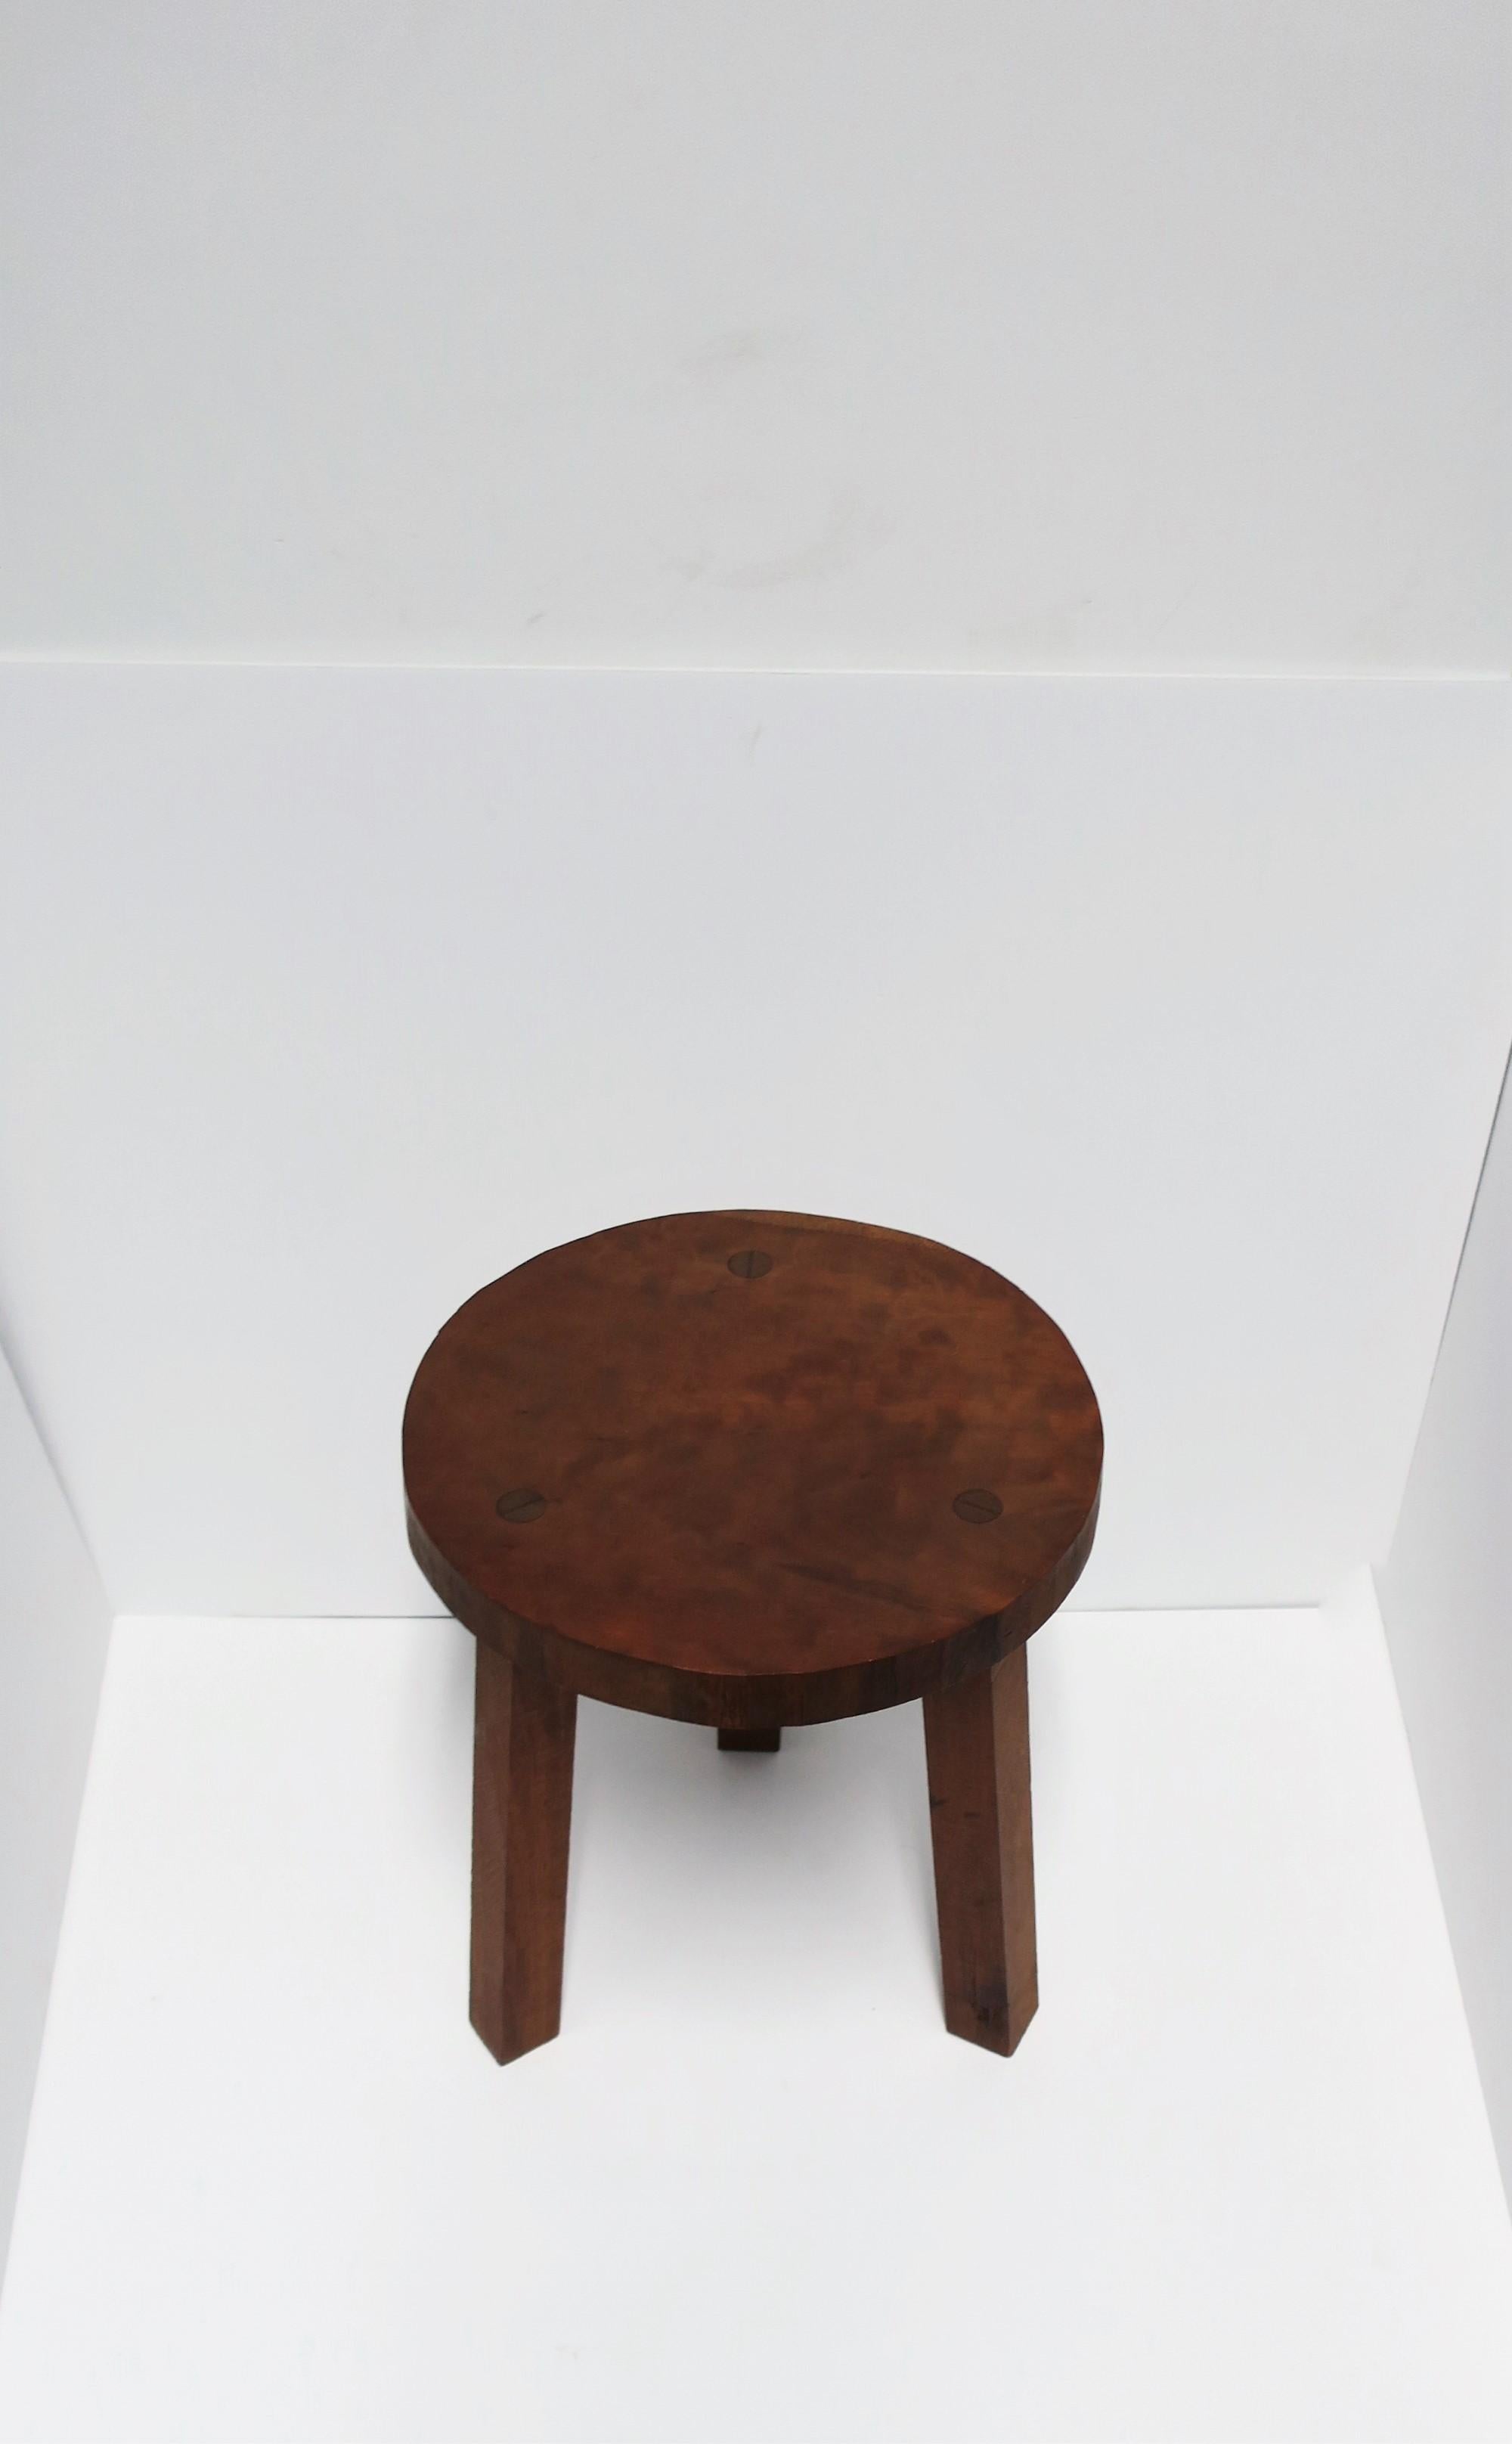 Wood Stool or Side Table with Tri-Pod Base In Good Condition For Sale In New York, NY